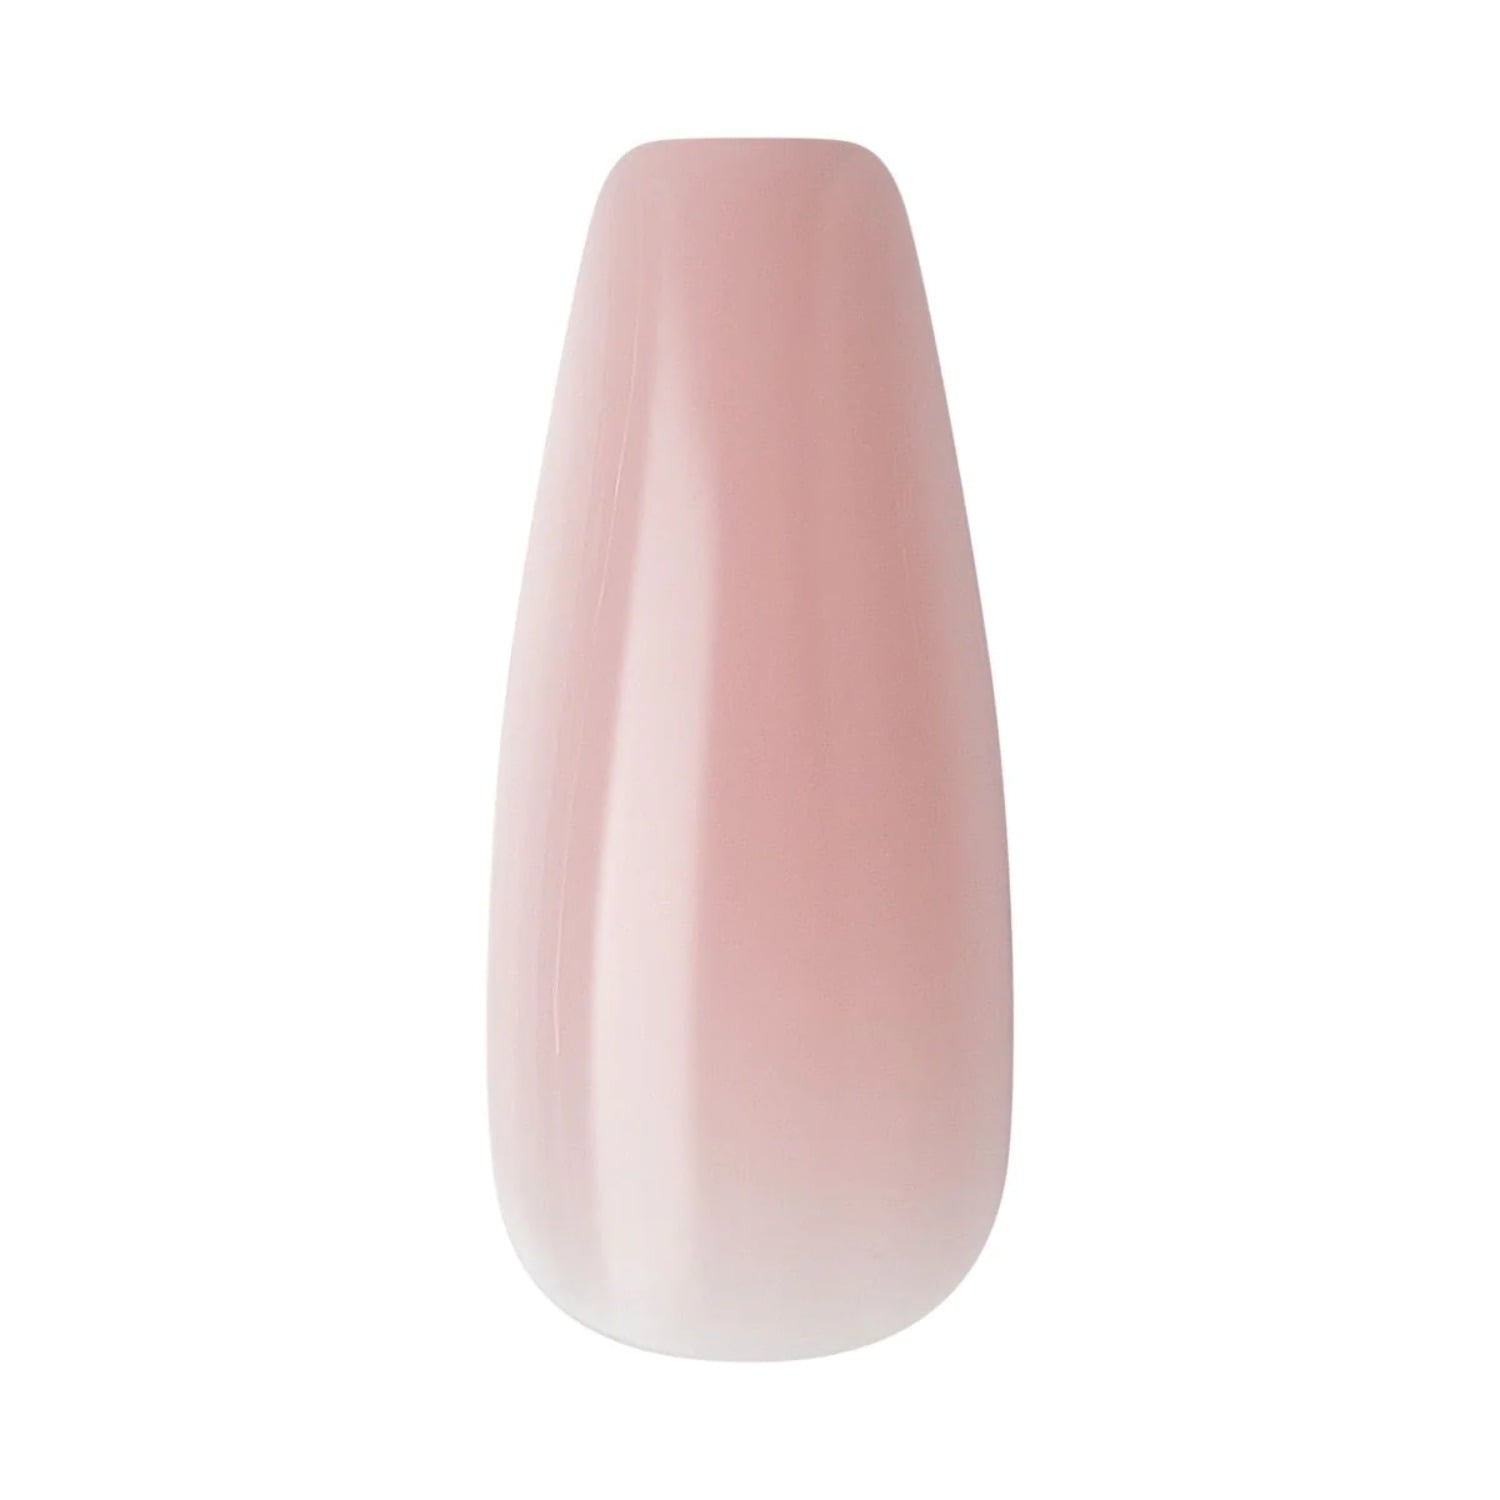 Kiss Bare-But-Better Nails - Berry Nude, 0.07 Oz (BN05)